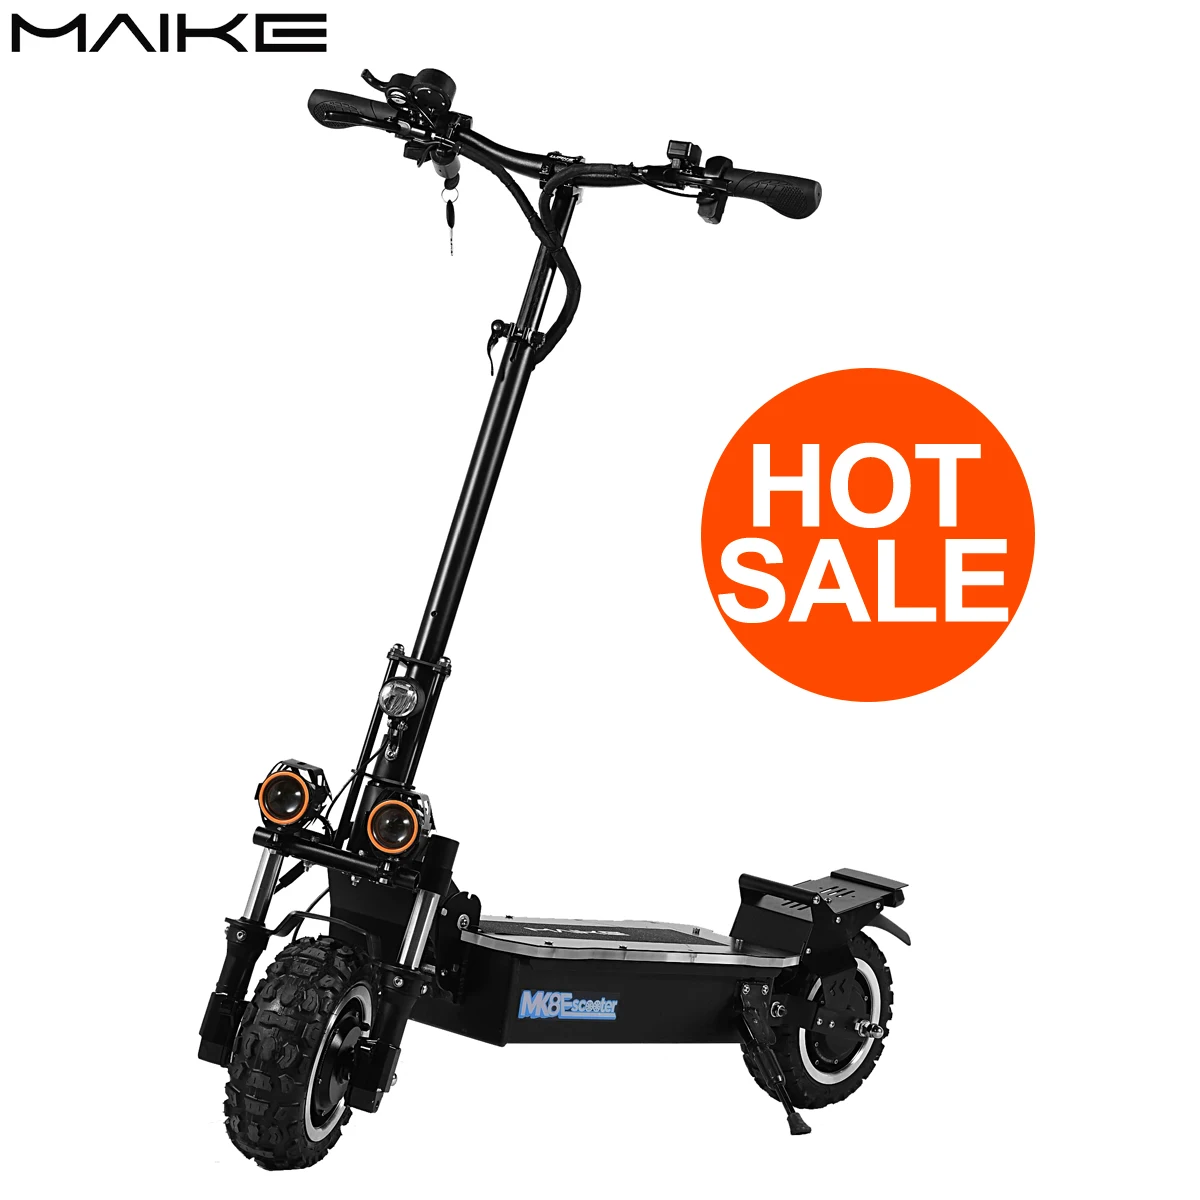 

New maike mk8 11 inch fat wheel 3200w dual motor high speed folding electric mobility scooters off road e scooter adult